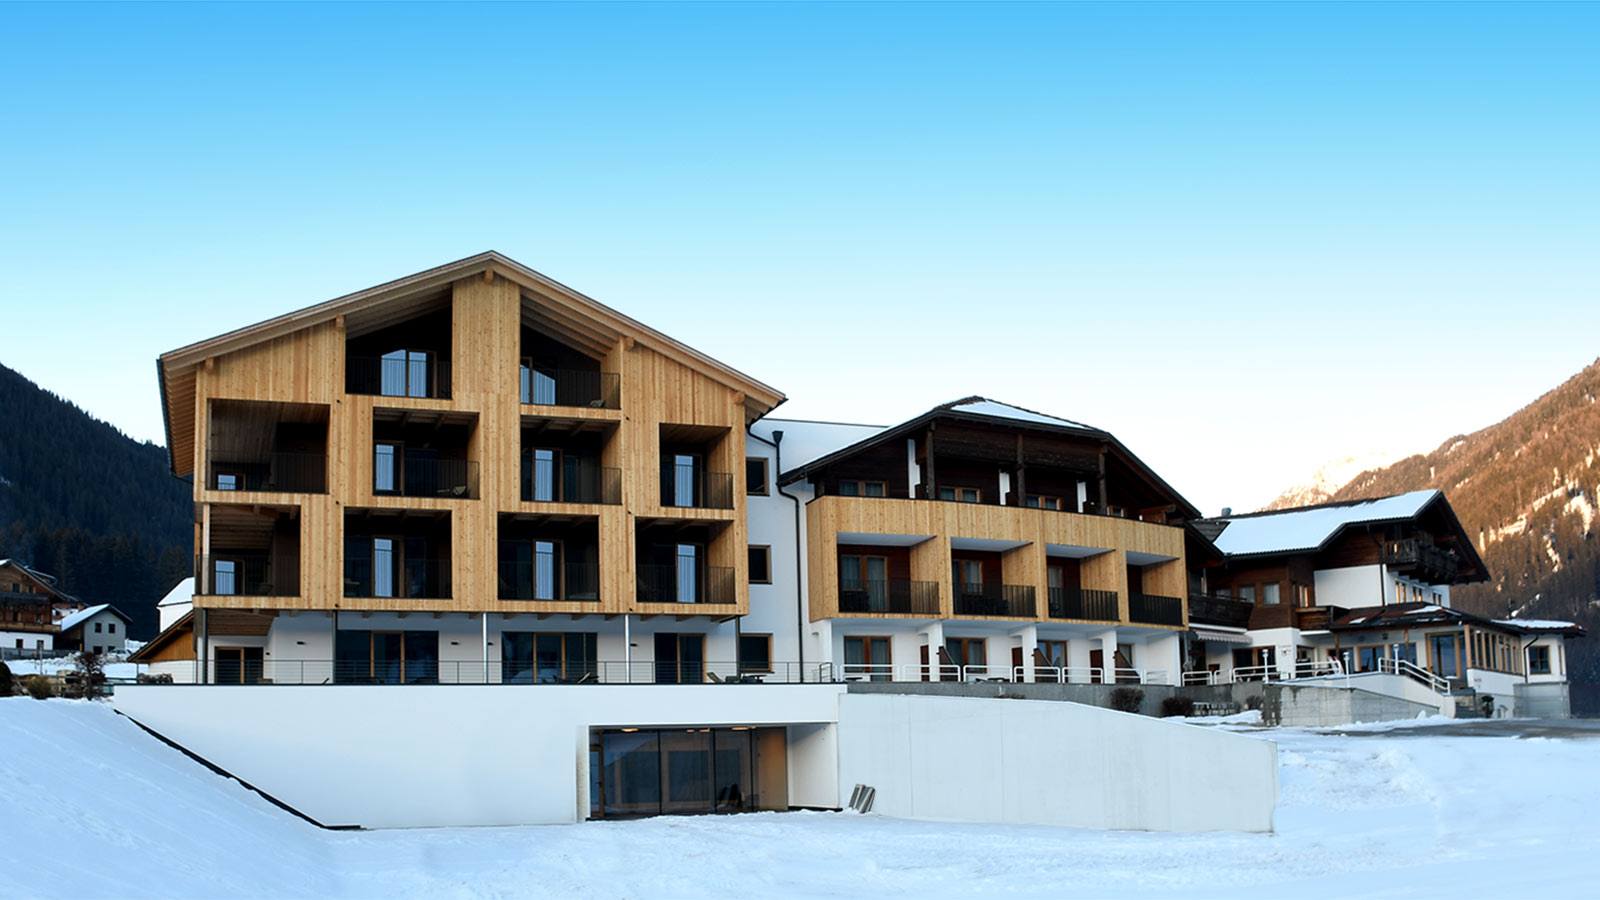 the Hotel Tyrol in snow-covered Gsies in winter